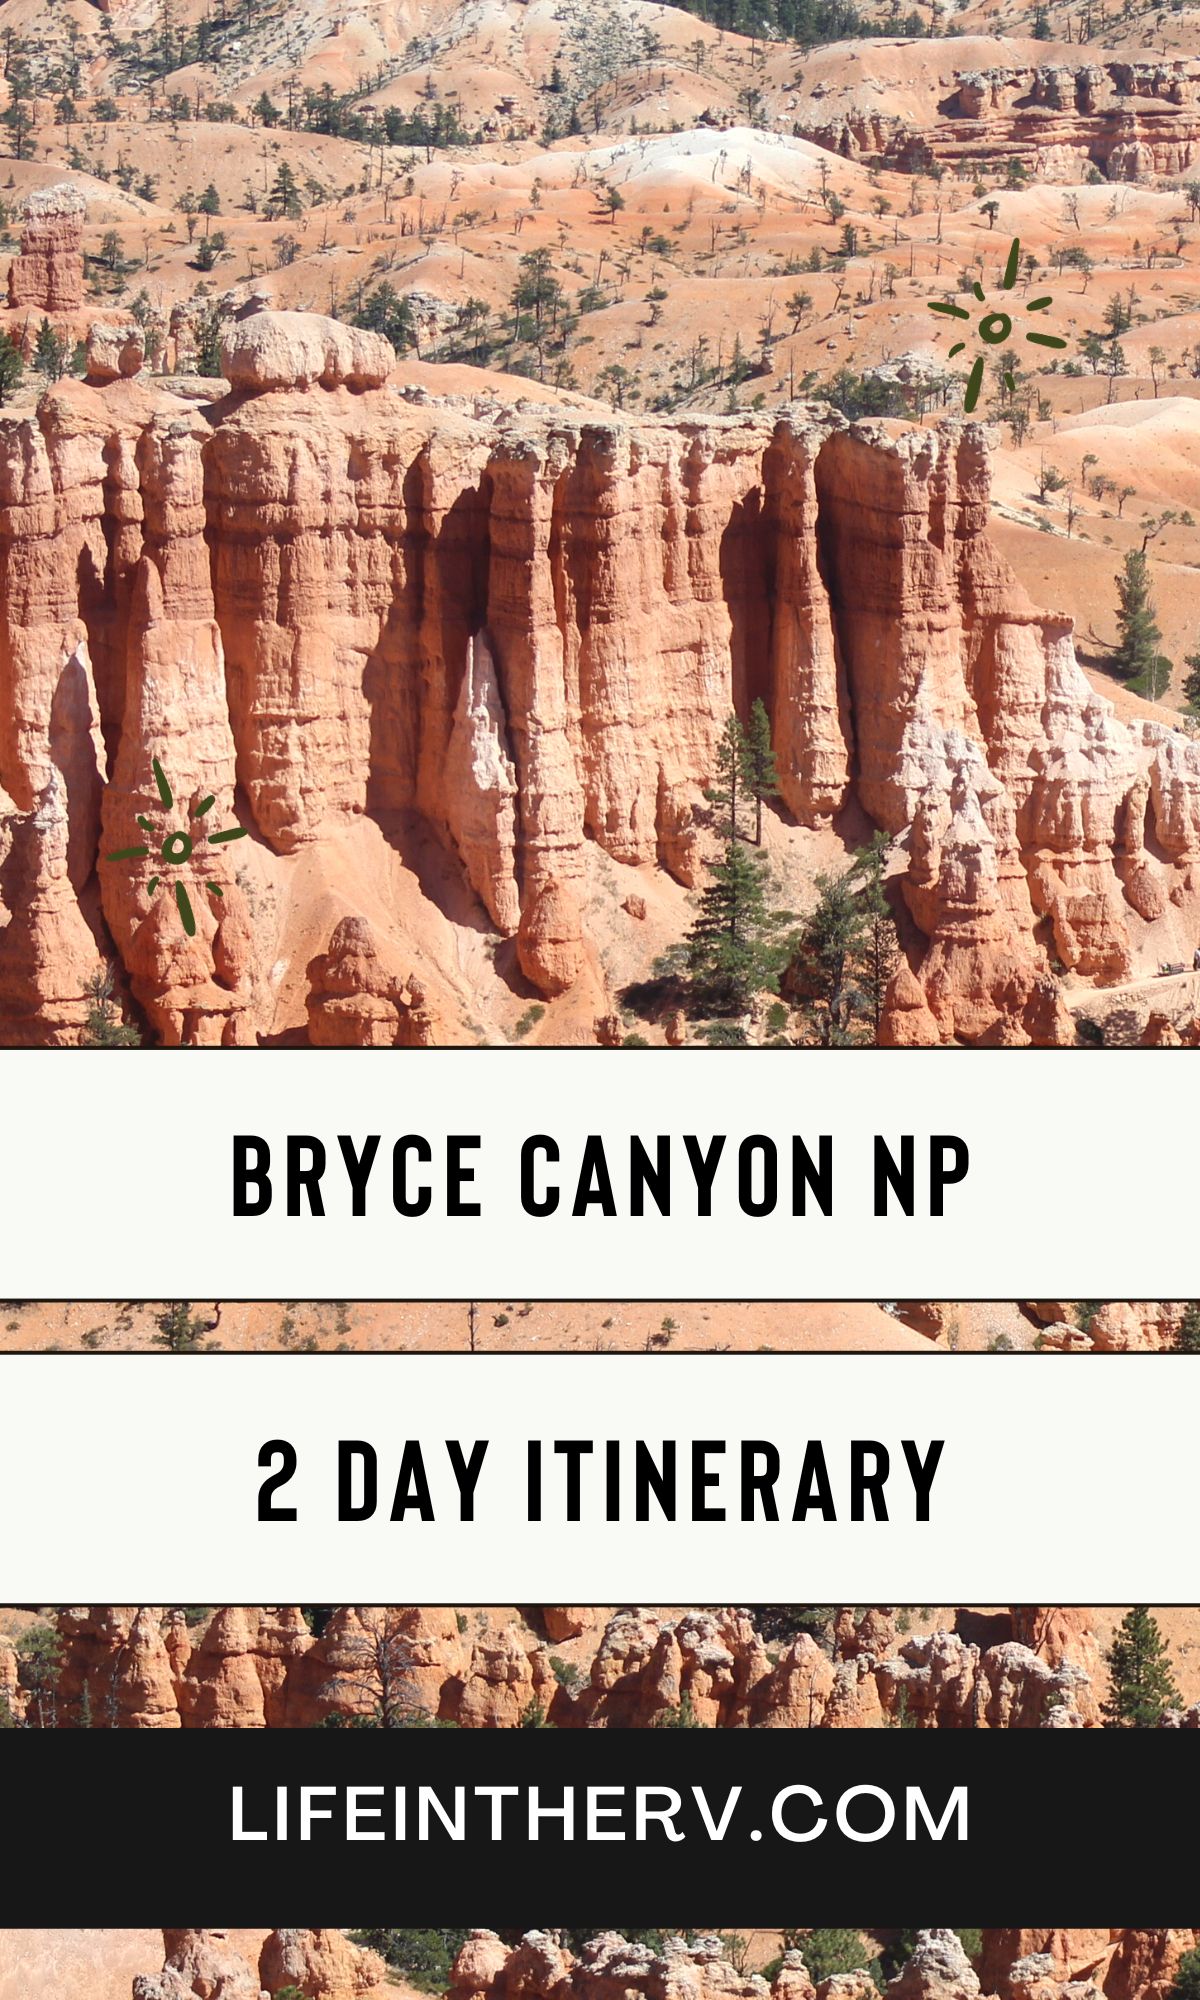 Bryce Canyon National Park offers a stunning 2-day itinerary filled with breathtaking views and adventurous hikes. Whether you're a nature lover or an outdoor enthusiast, Bryce Canyon NP is the perfect destination for